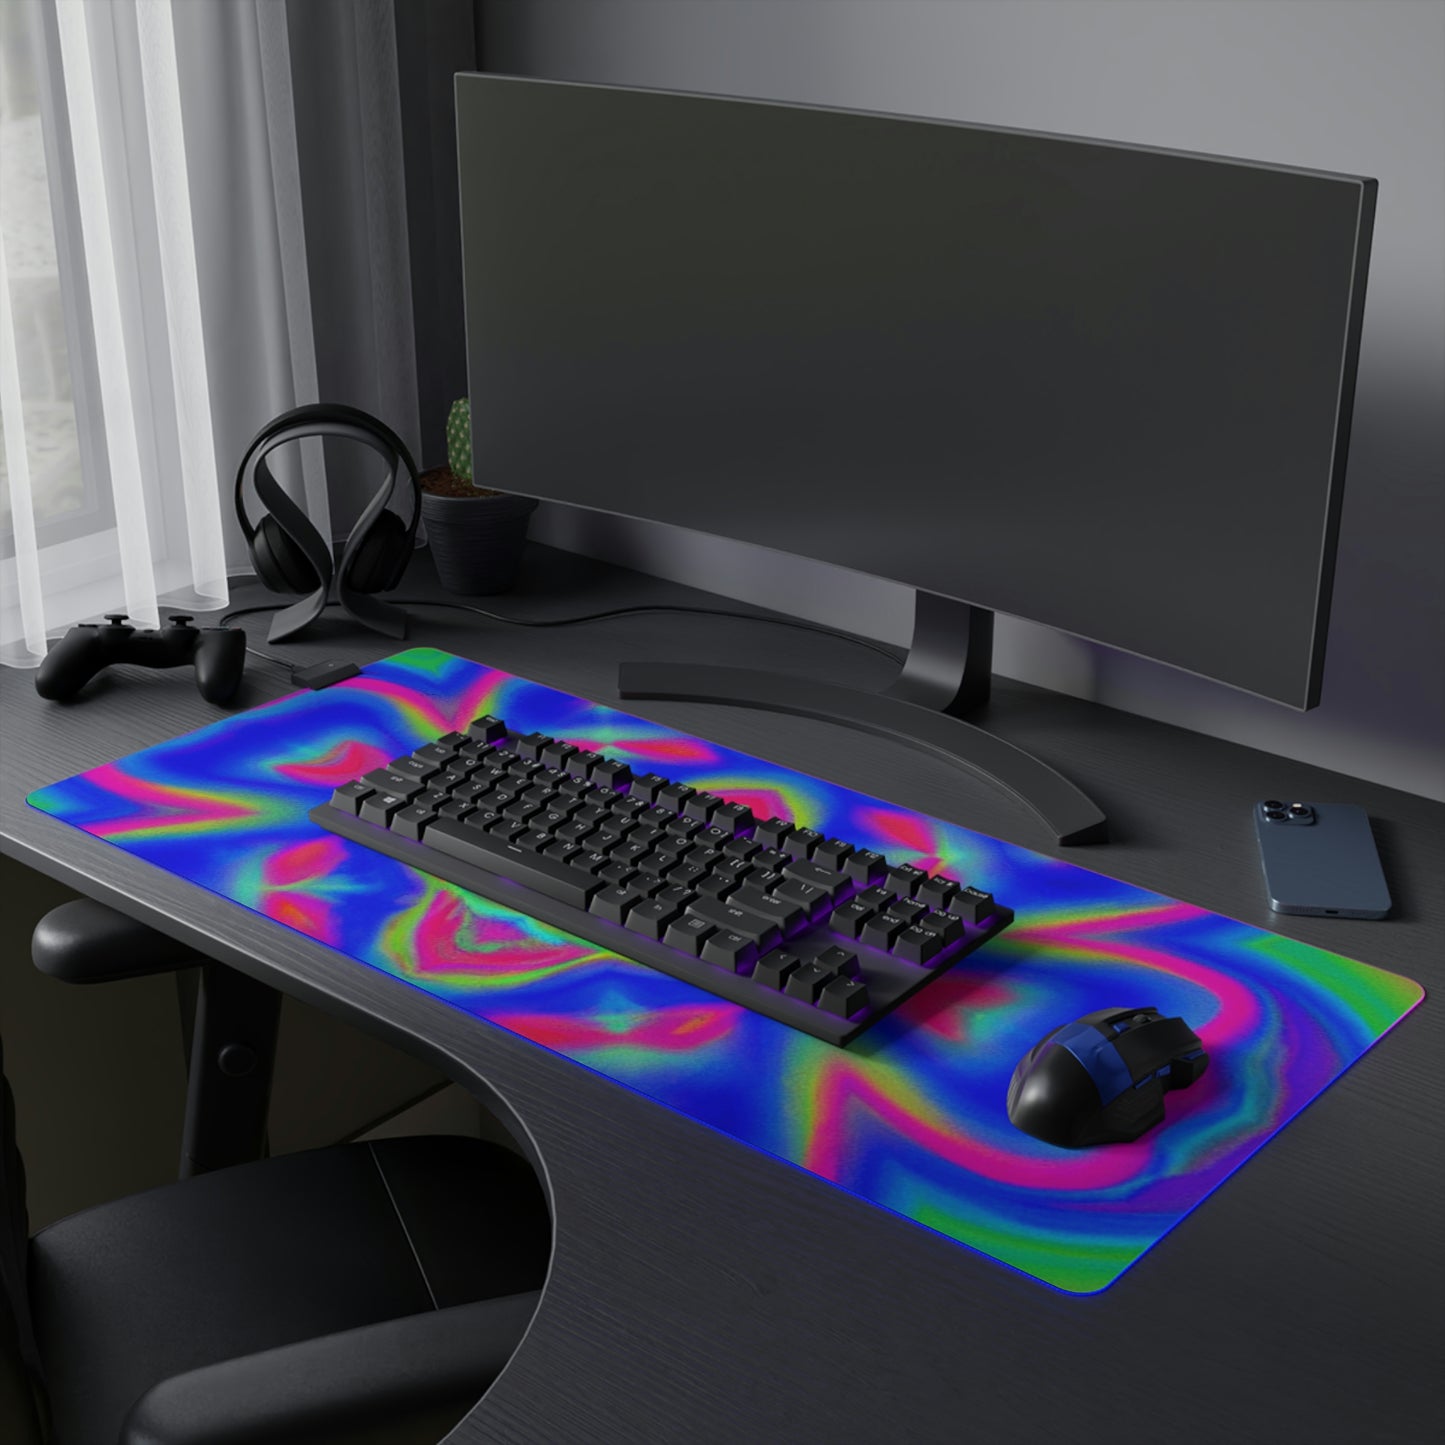 Raymond "Ray" Zipster, Space Cowboy. - Psychedelic Trippy LED Light Up Gaming Mouse Pad